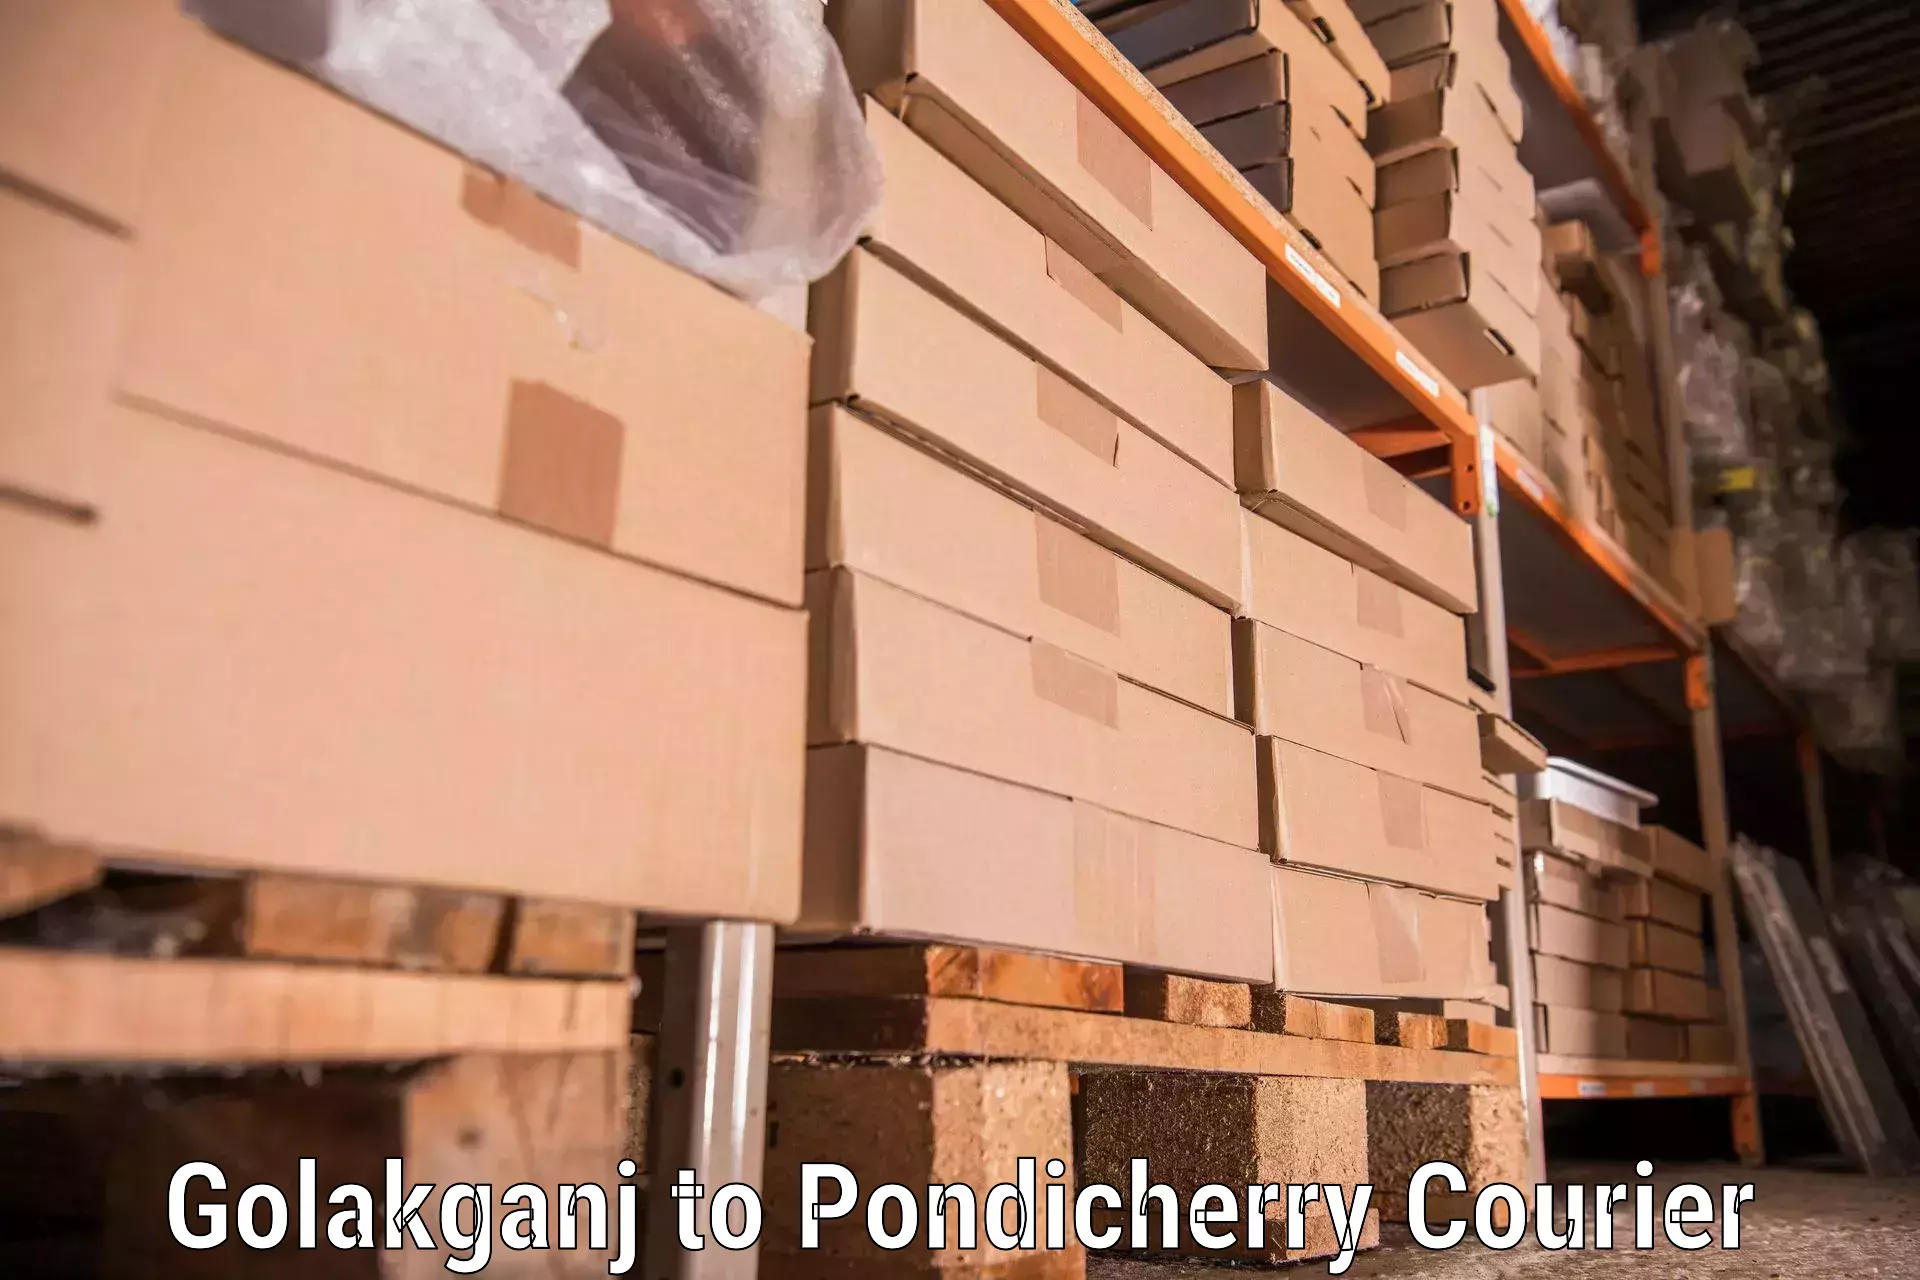 Furniture moving assistance in Golakganj to Pondicherry